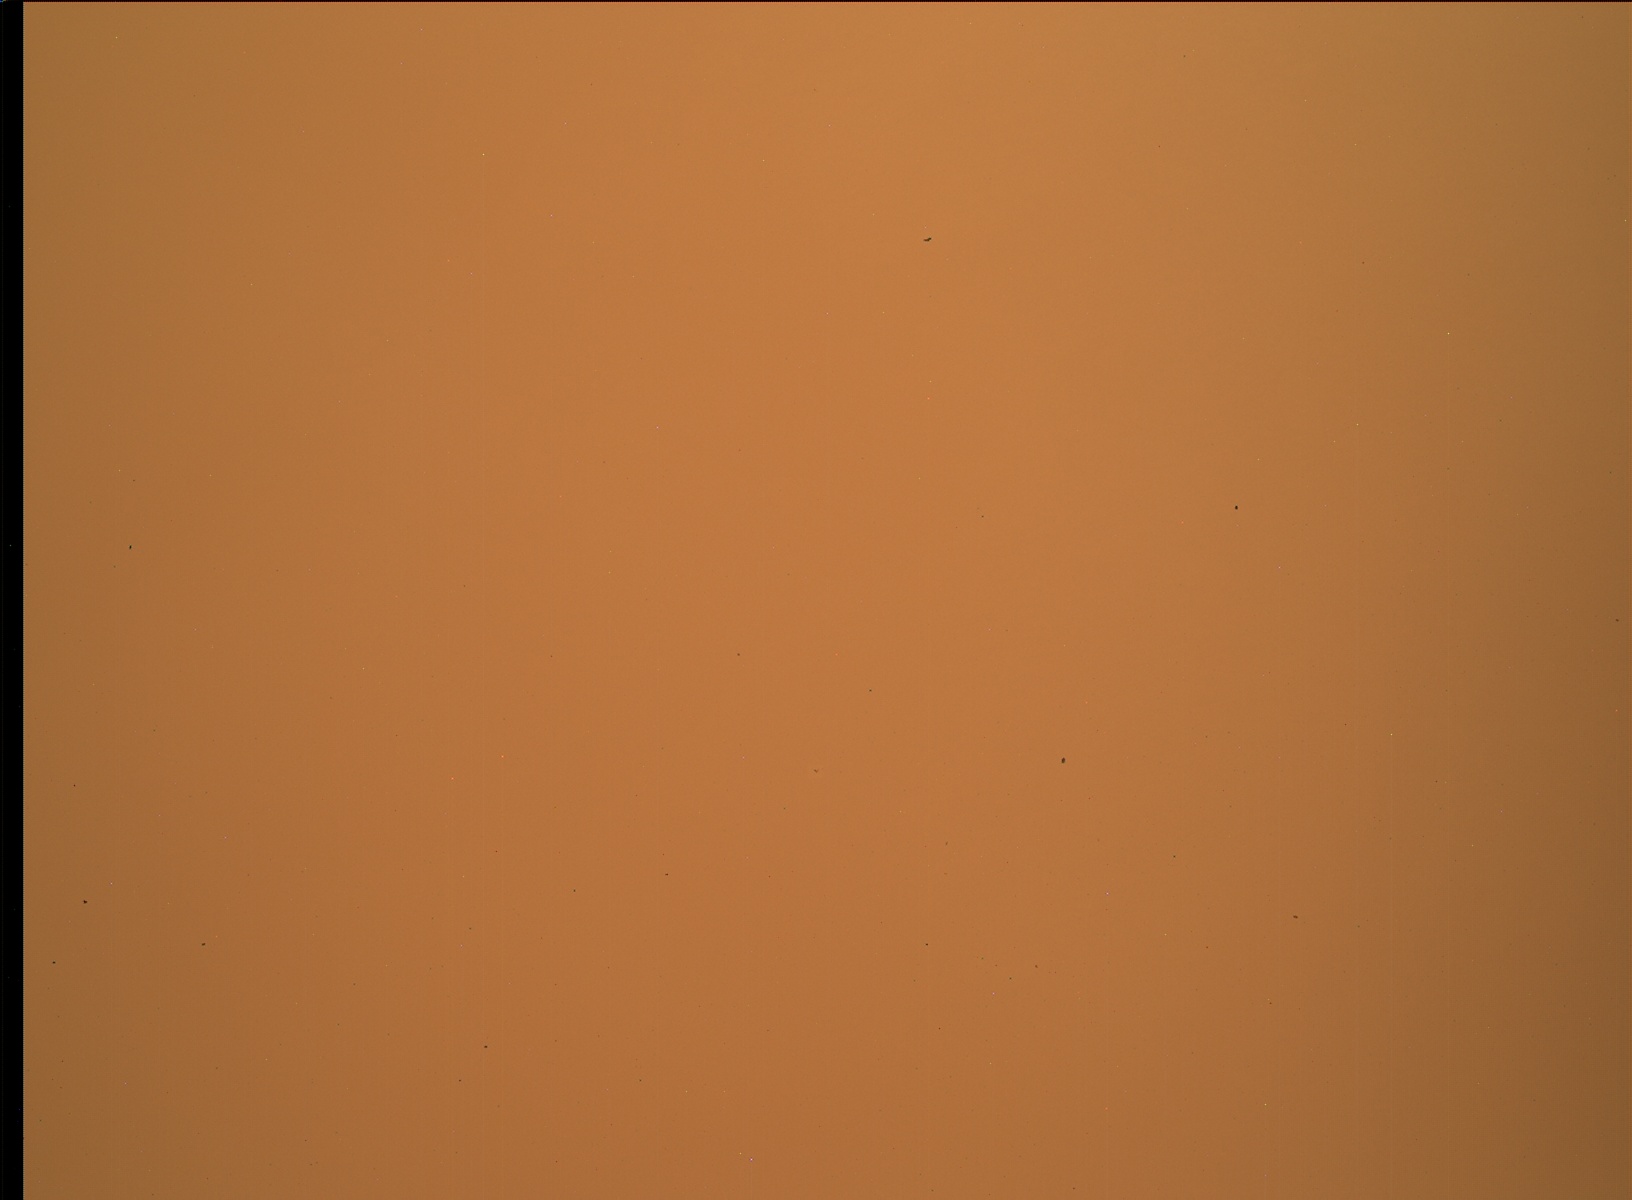 Nasa's Mars rover Curiosity acquired this image using its Mars Hand Lens Imager (MAHLI) on Sol 2852, at drive 2176, site number 82